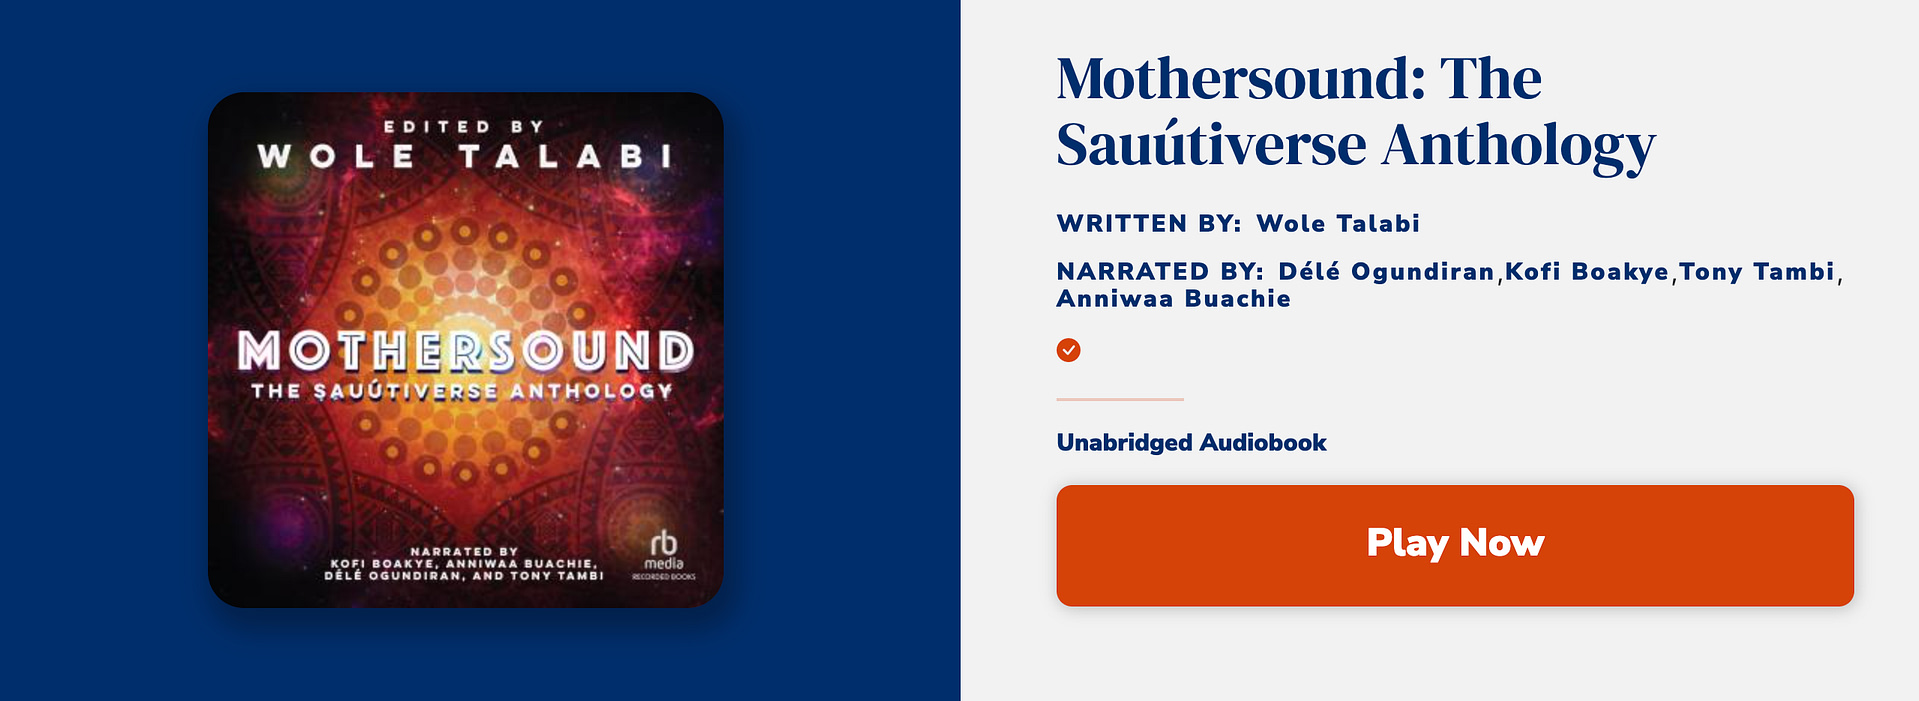 Mothersound: The Sauútiverse Anthology Audiobook is Out